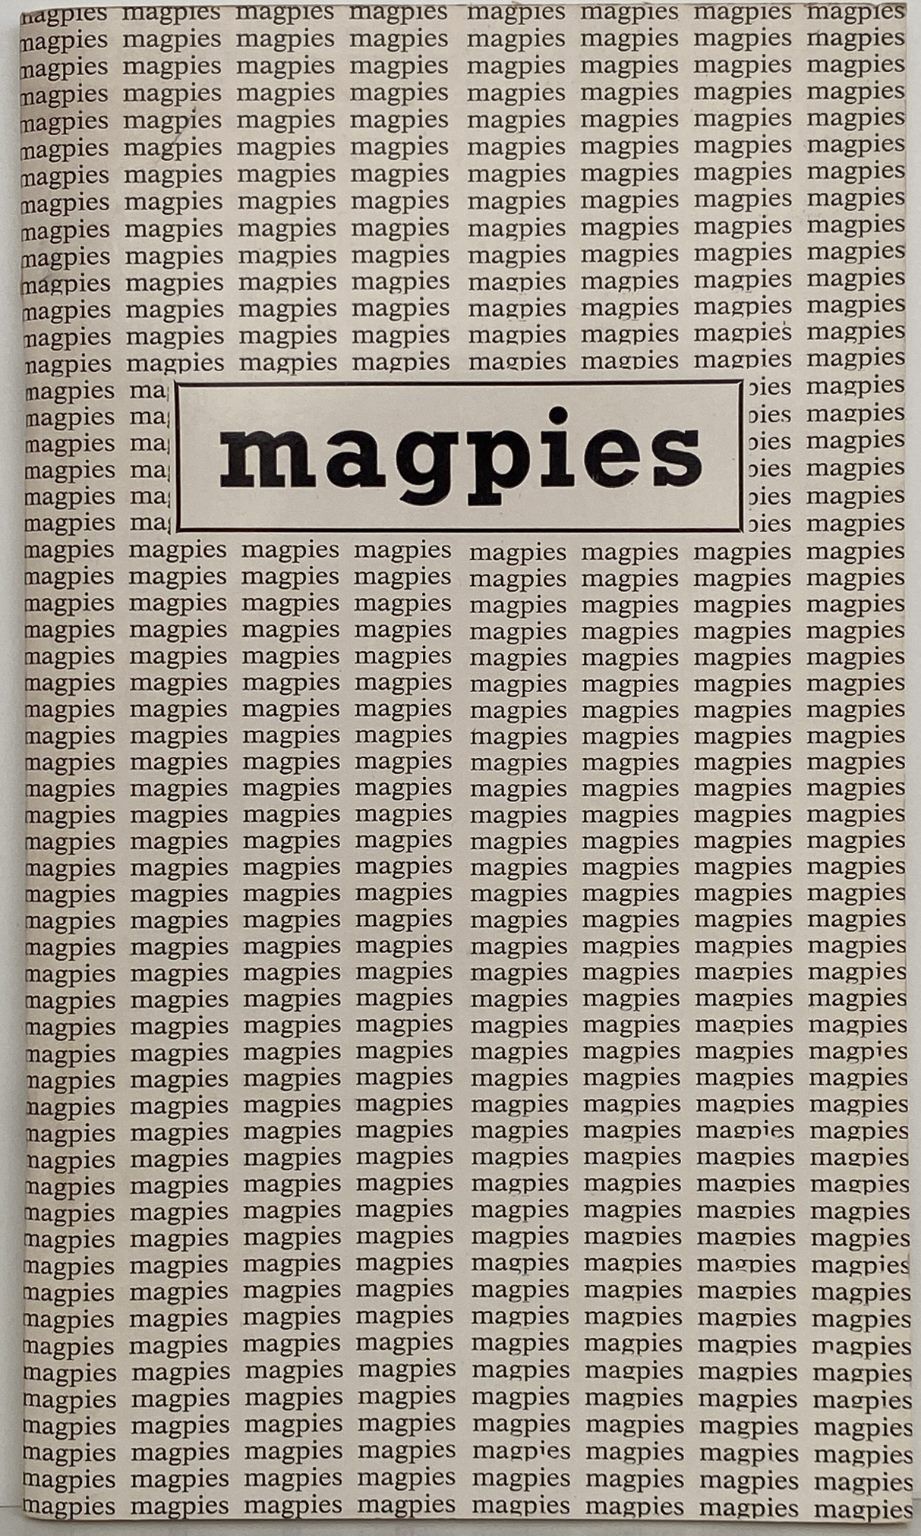 MAGPIES: A Collection of Words